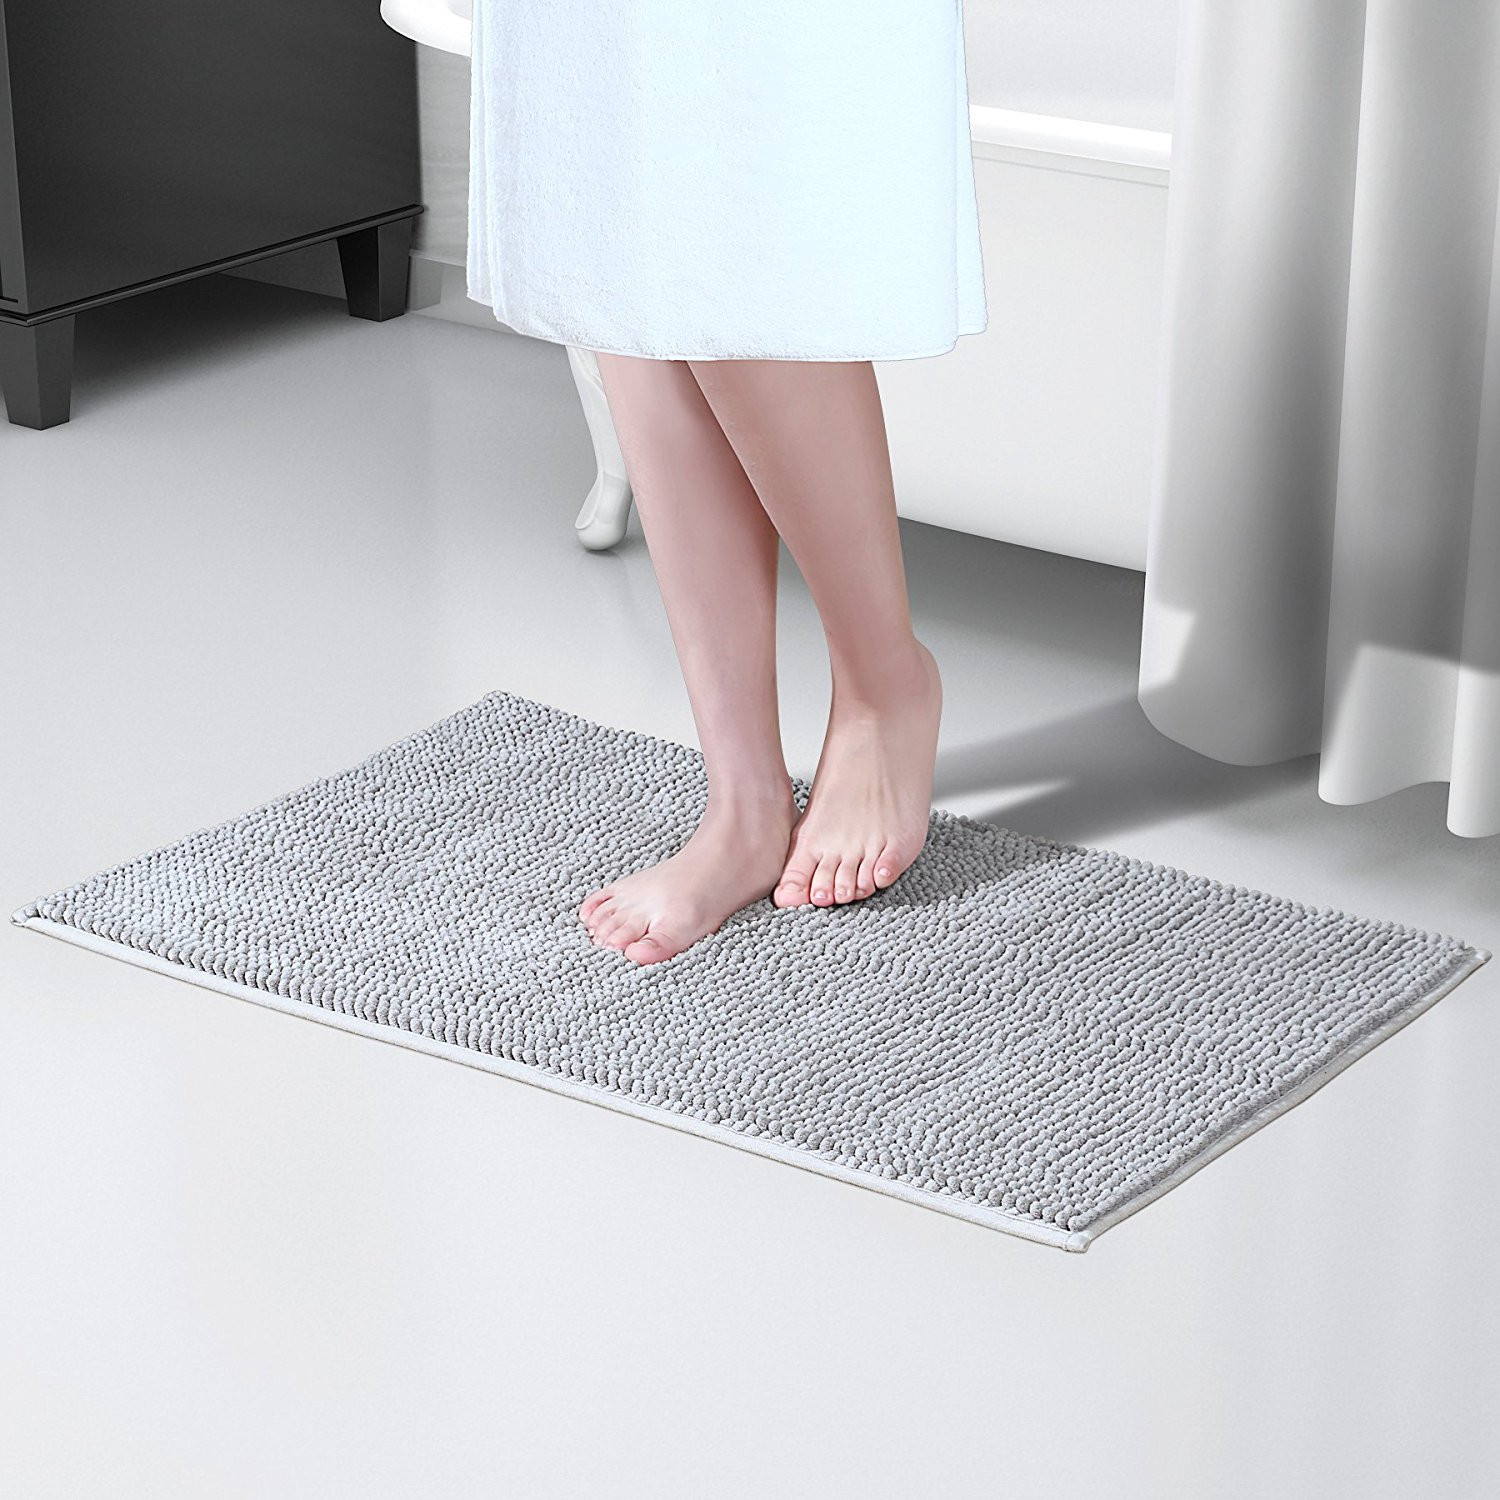 Bathroom Shower Mats
 Best Bathroom Mat Reviews with Buying Guide 2018